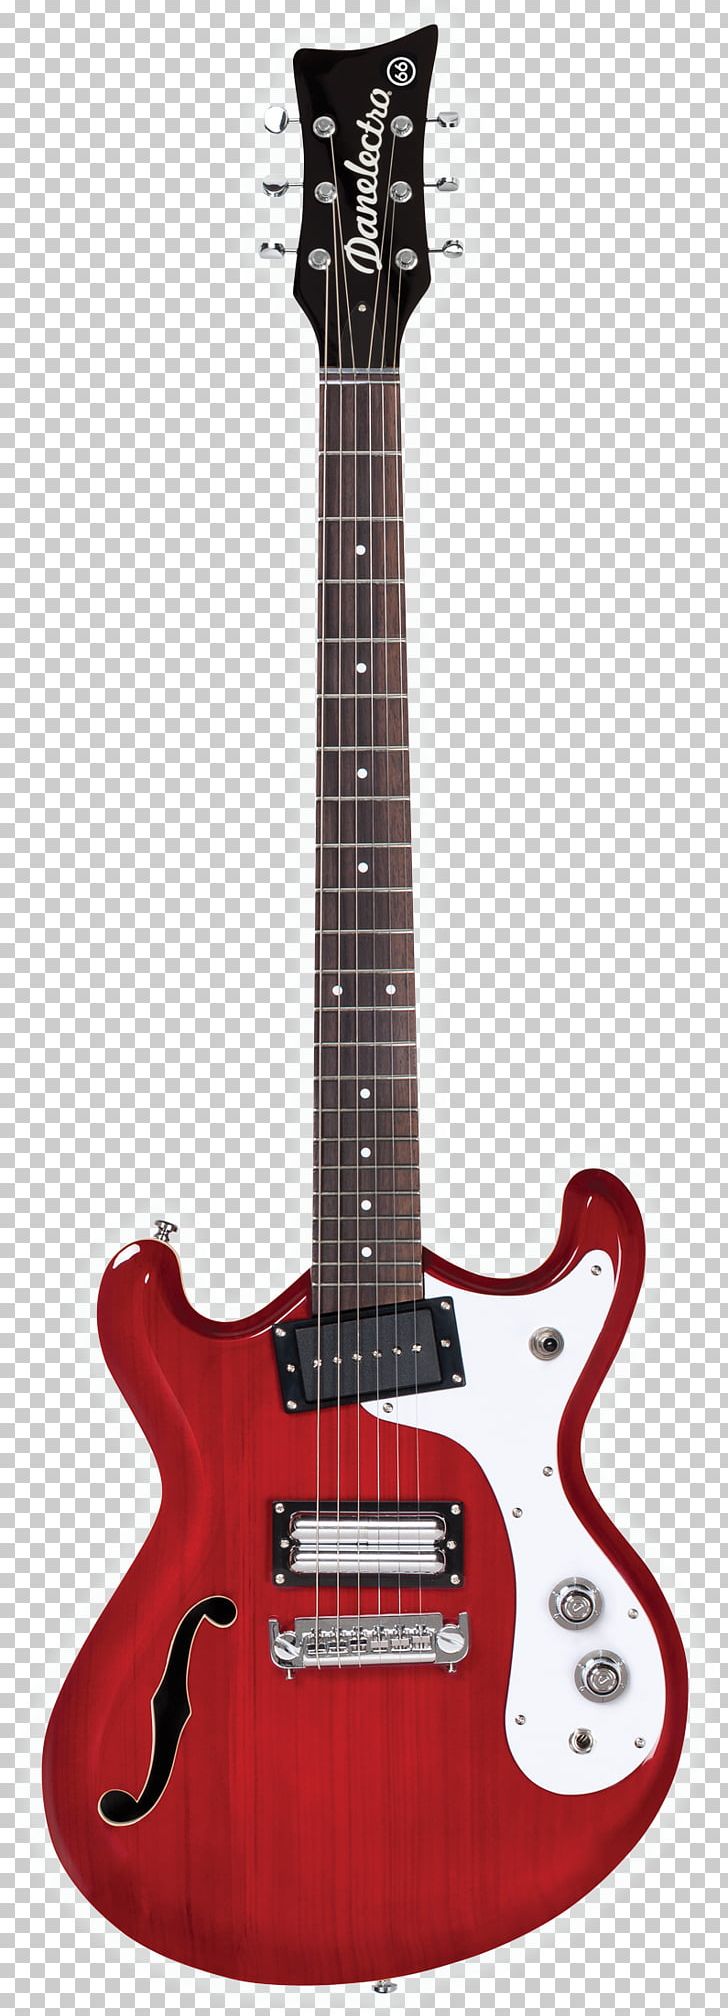 Baritone Guitar Danelectro Electric Guitar Semi-acoustic Guitar PNG, Clipart, Guitar Accessory, Mosrite, Musical Instrument, Musical Instruments, Objects Free PNG Download